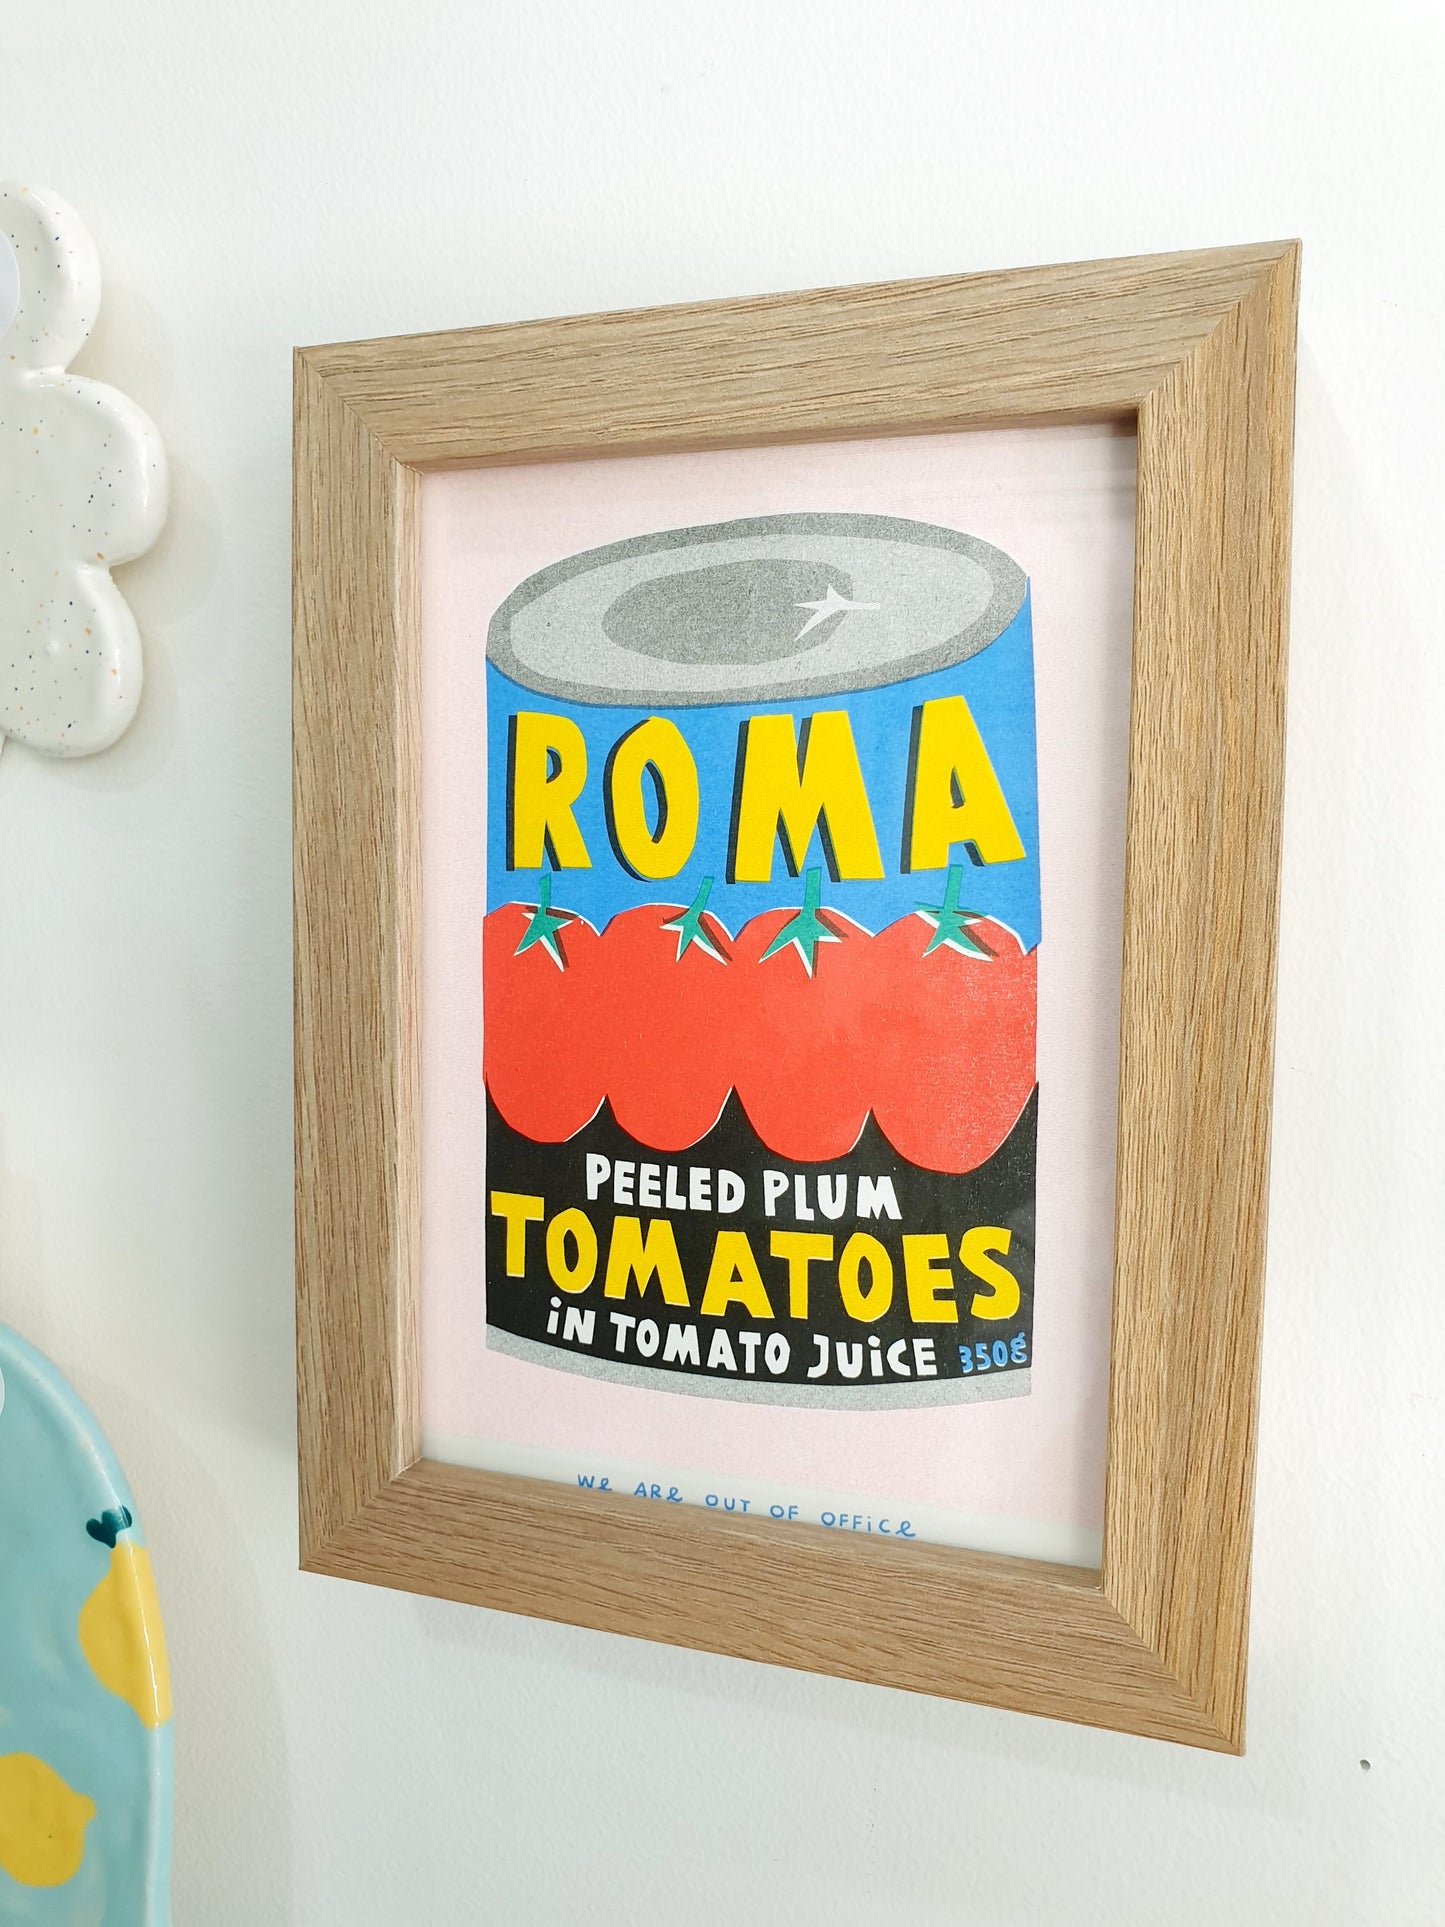 'A can of Roma plum tomatoes' - FRAMED risograph print by 'We are out of office'